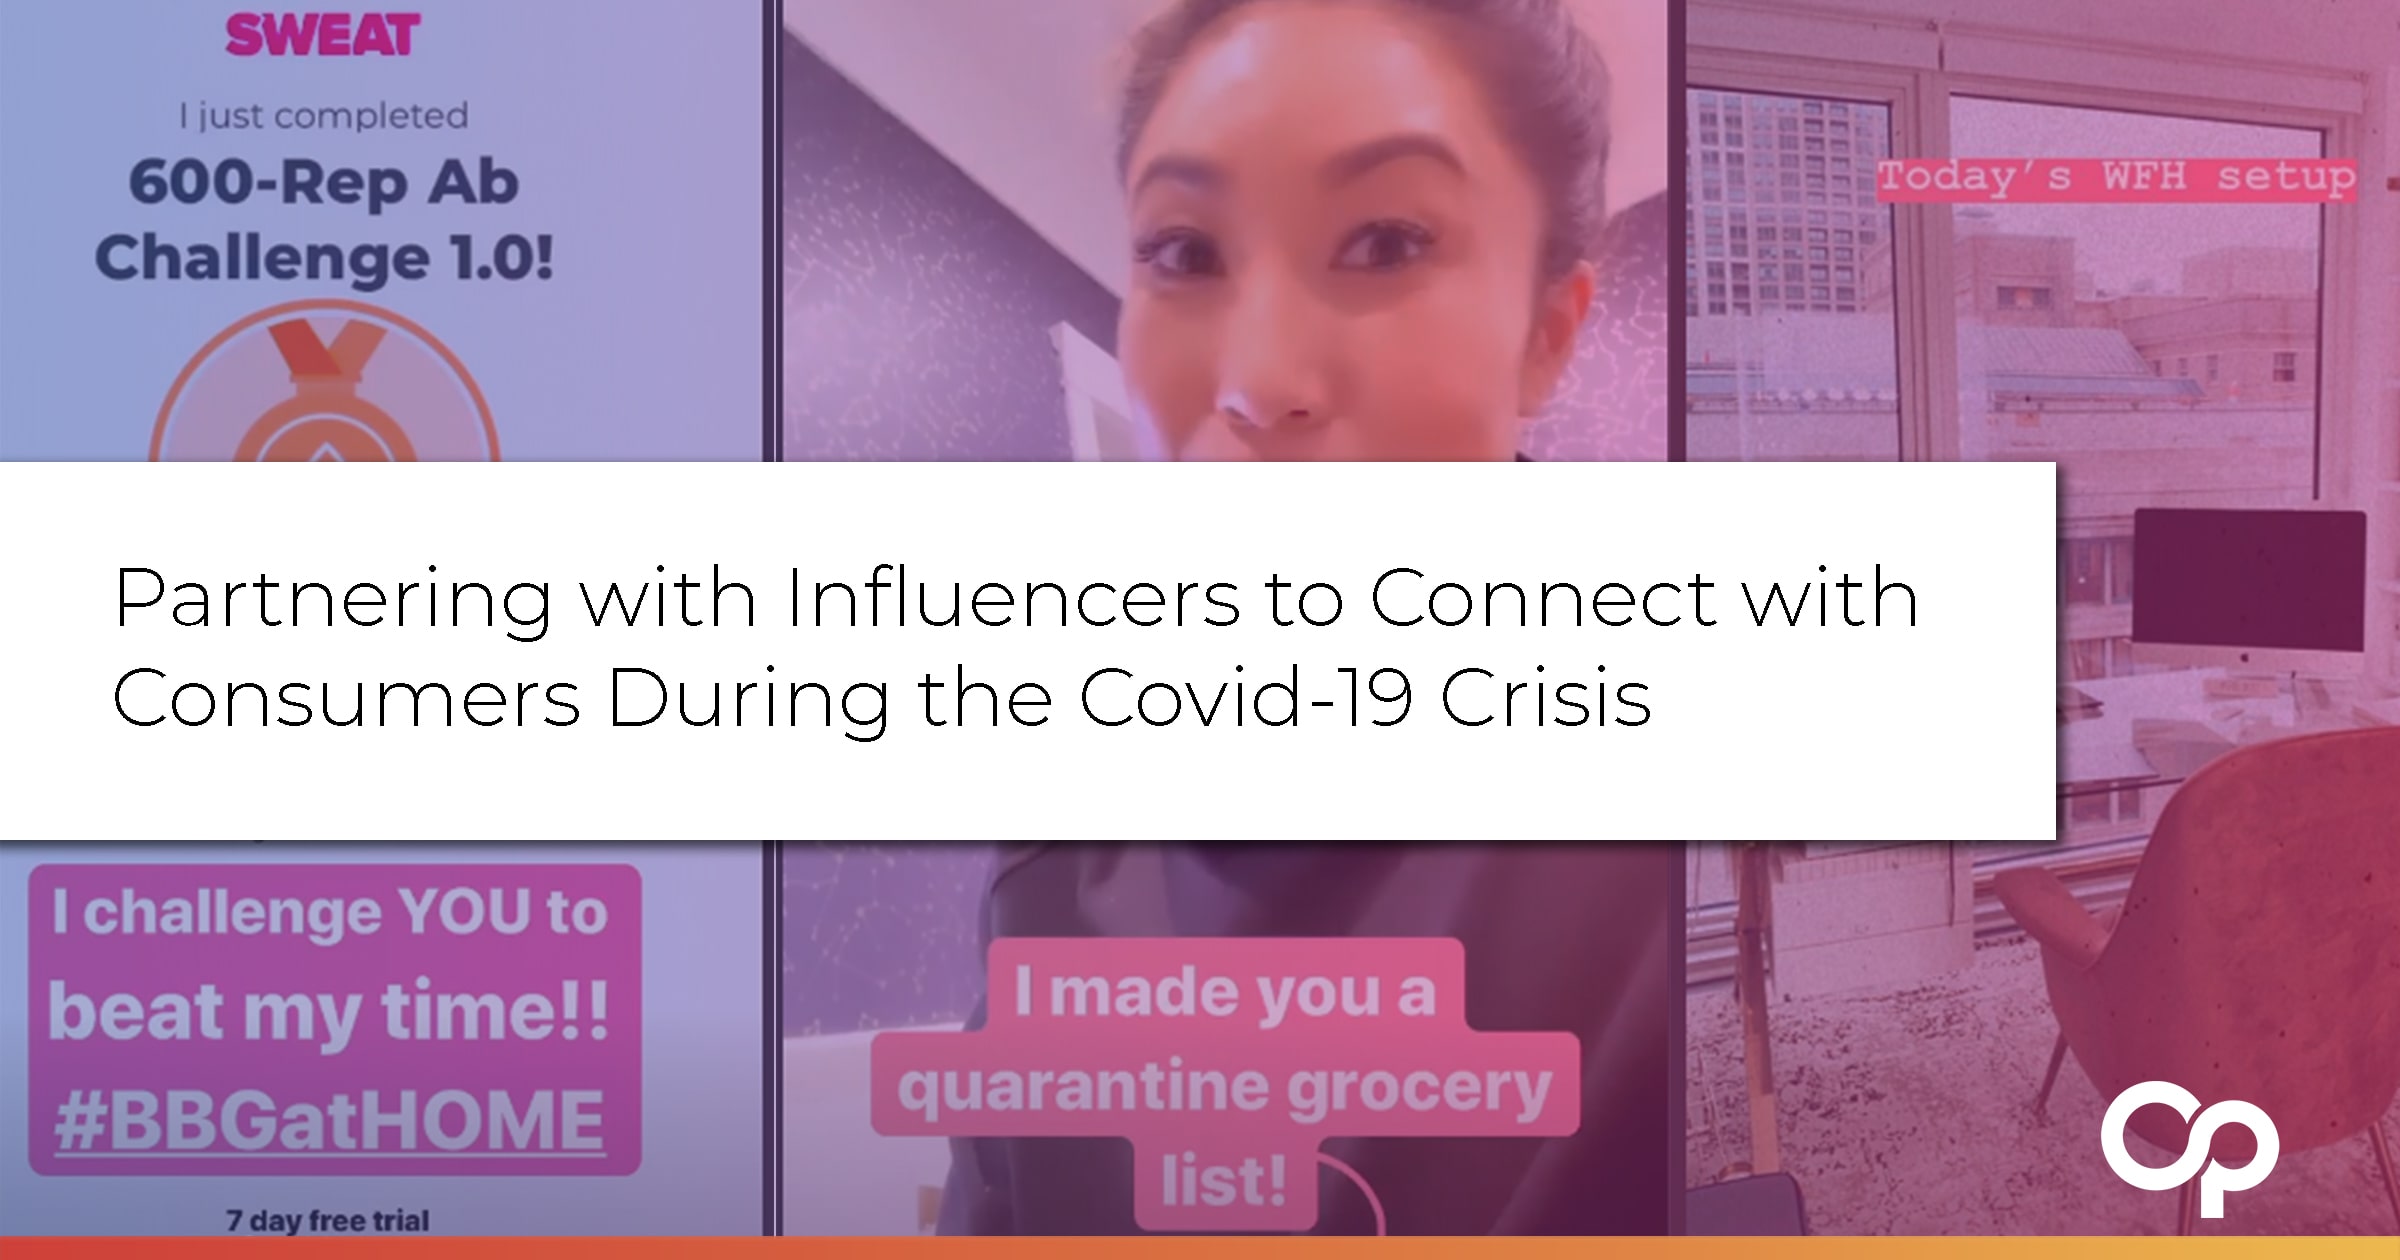 Influencer Marketing Presents Opportunities for Connection During the COVID-19 Crisis